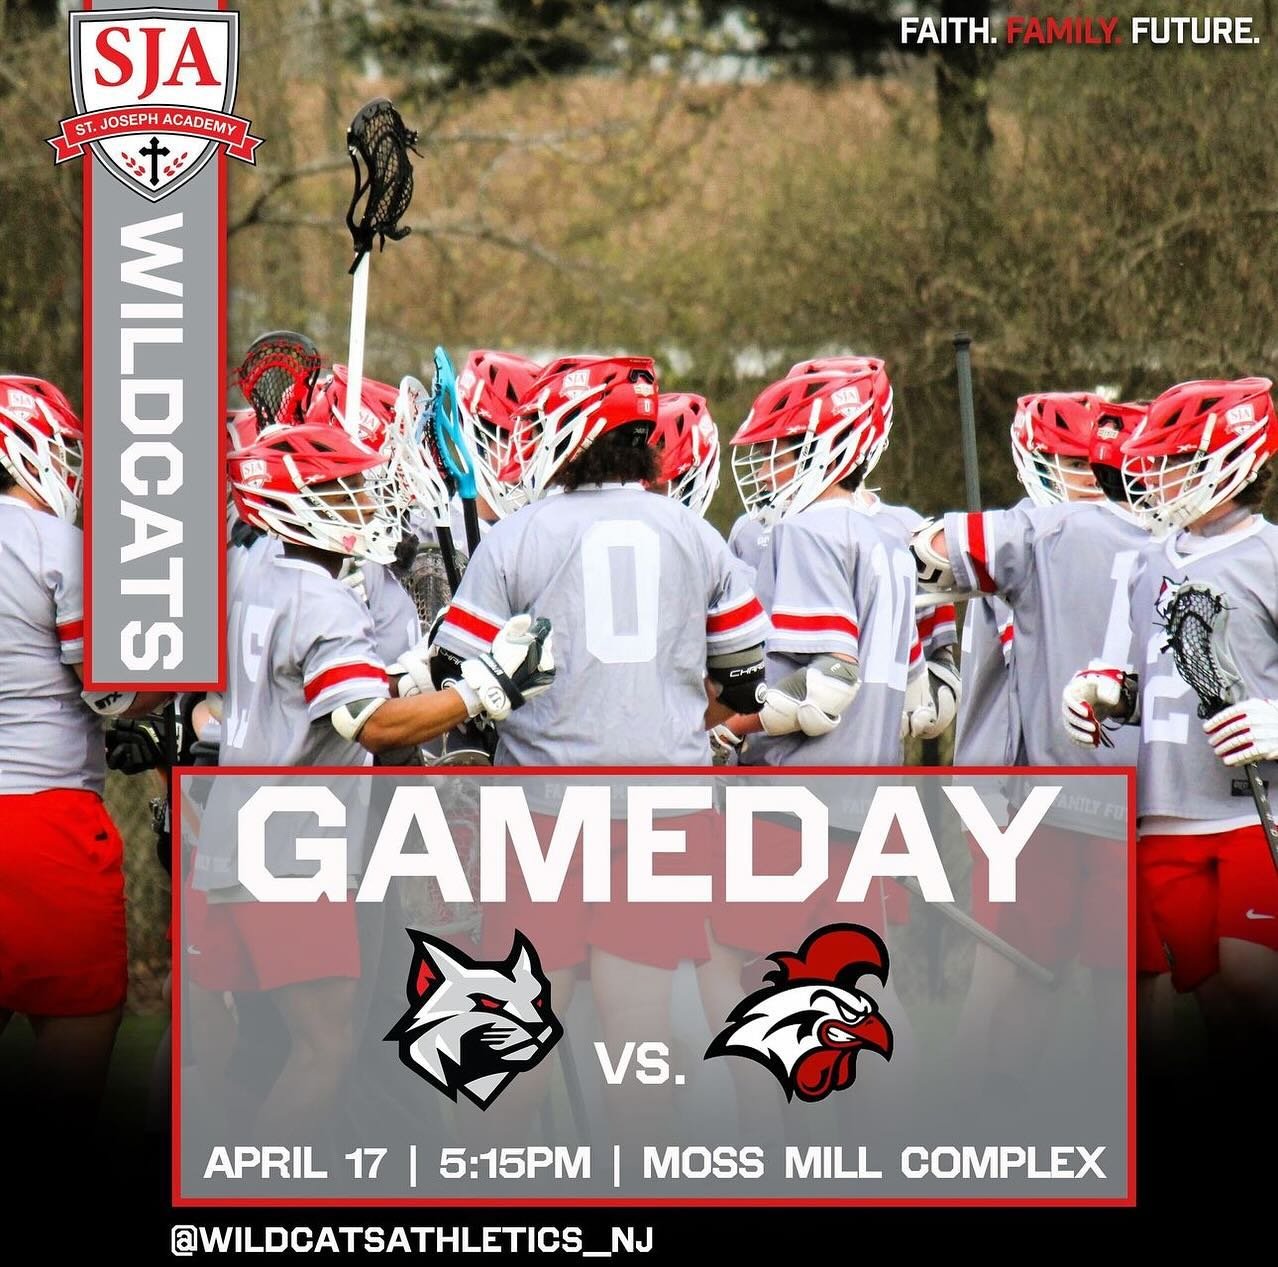 IT&rsquo;S GAMEDAY!!!

Boys Lacrosse is back on Home Turf @ 5:15

Softball takes on Audubon at Home @ 4:00

Baseball Travels to Holy Spirit today @ 4:00

Girls Lacrosse travels to EHT today @ 4:00
#FaithFamilyFuture